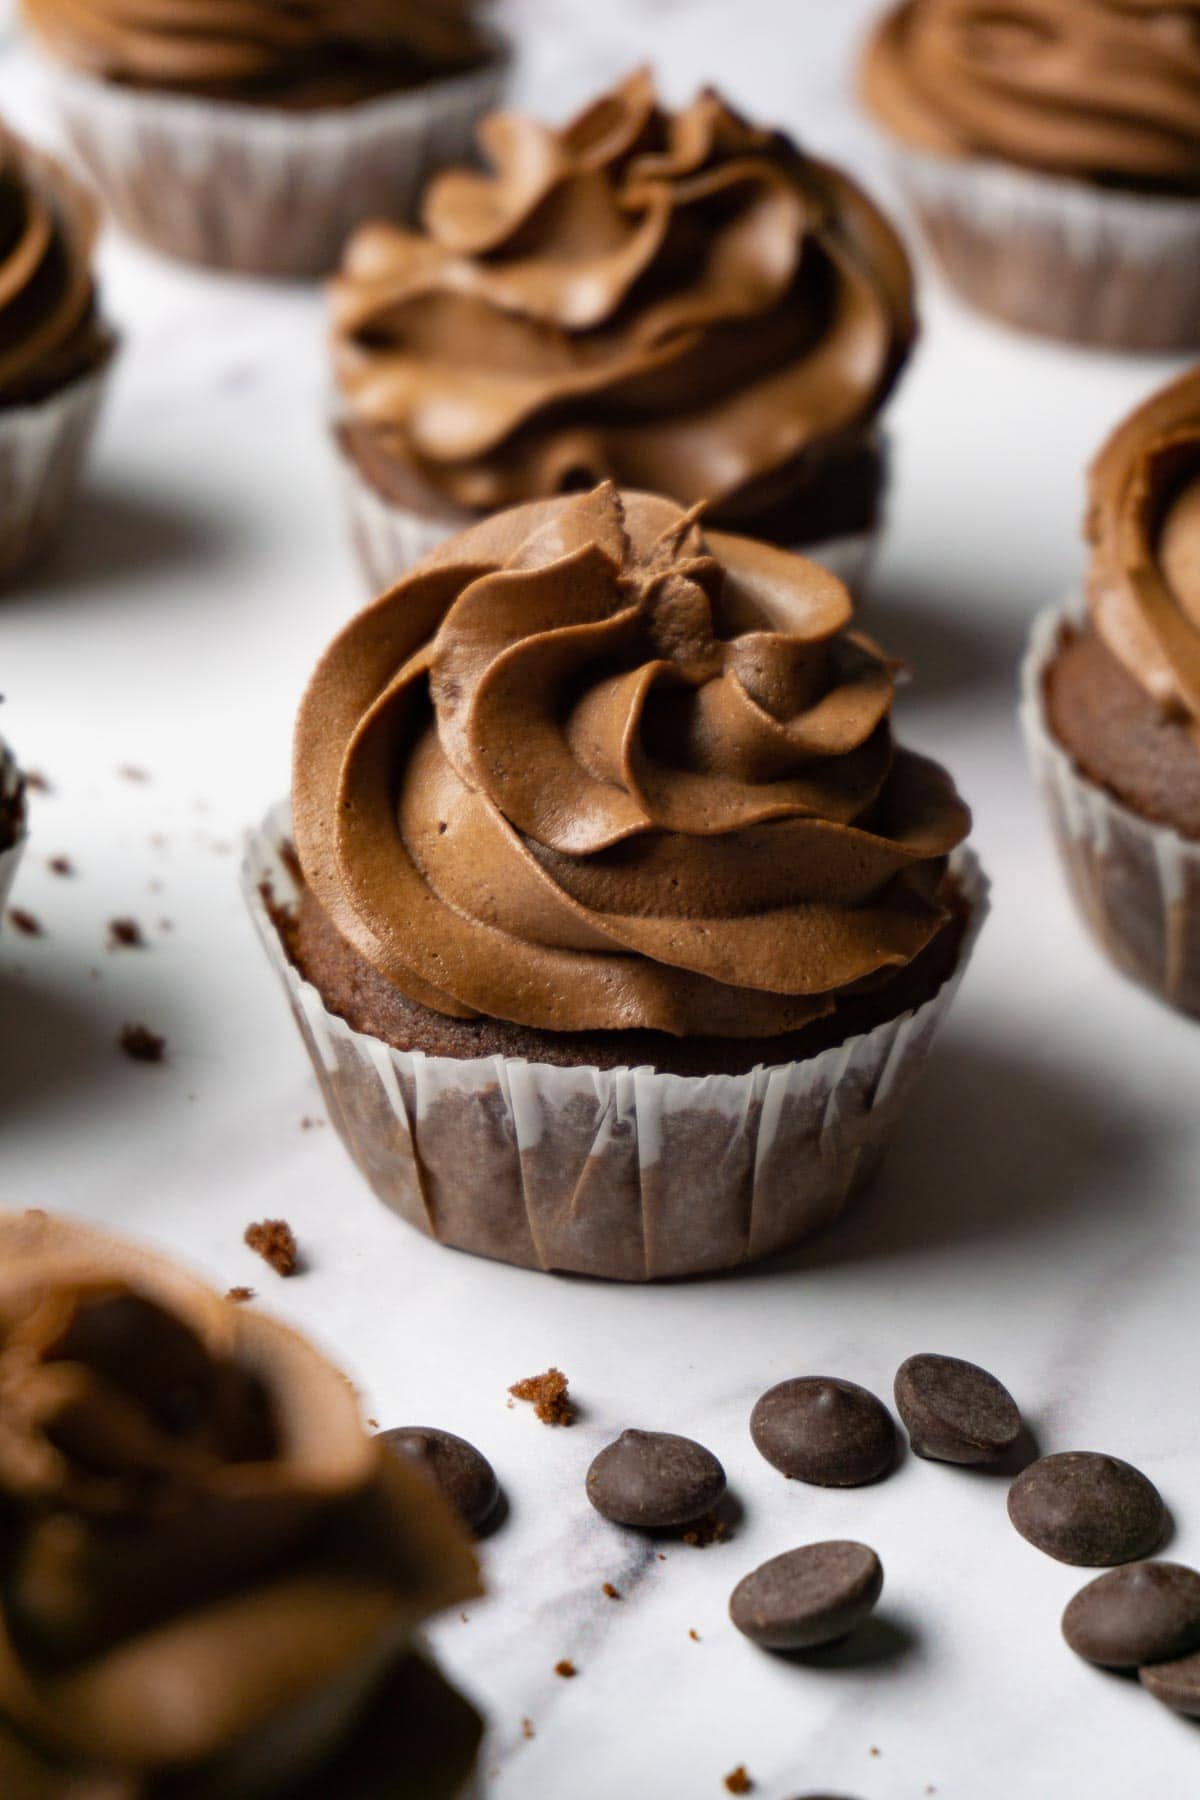 Chocolate cupcakes with chocolate frosting on a marble surface, chocolate chips are lying around.